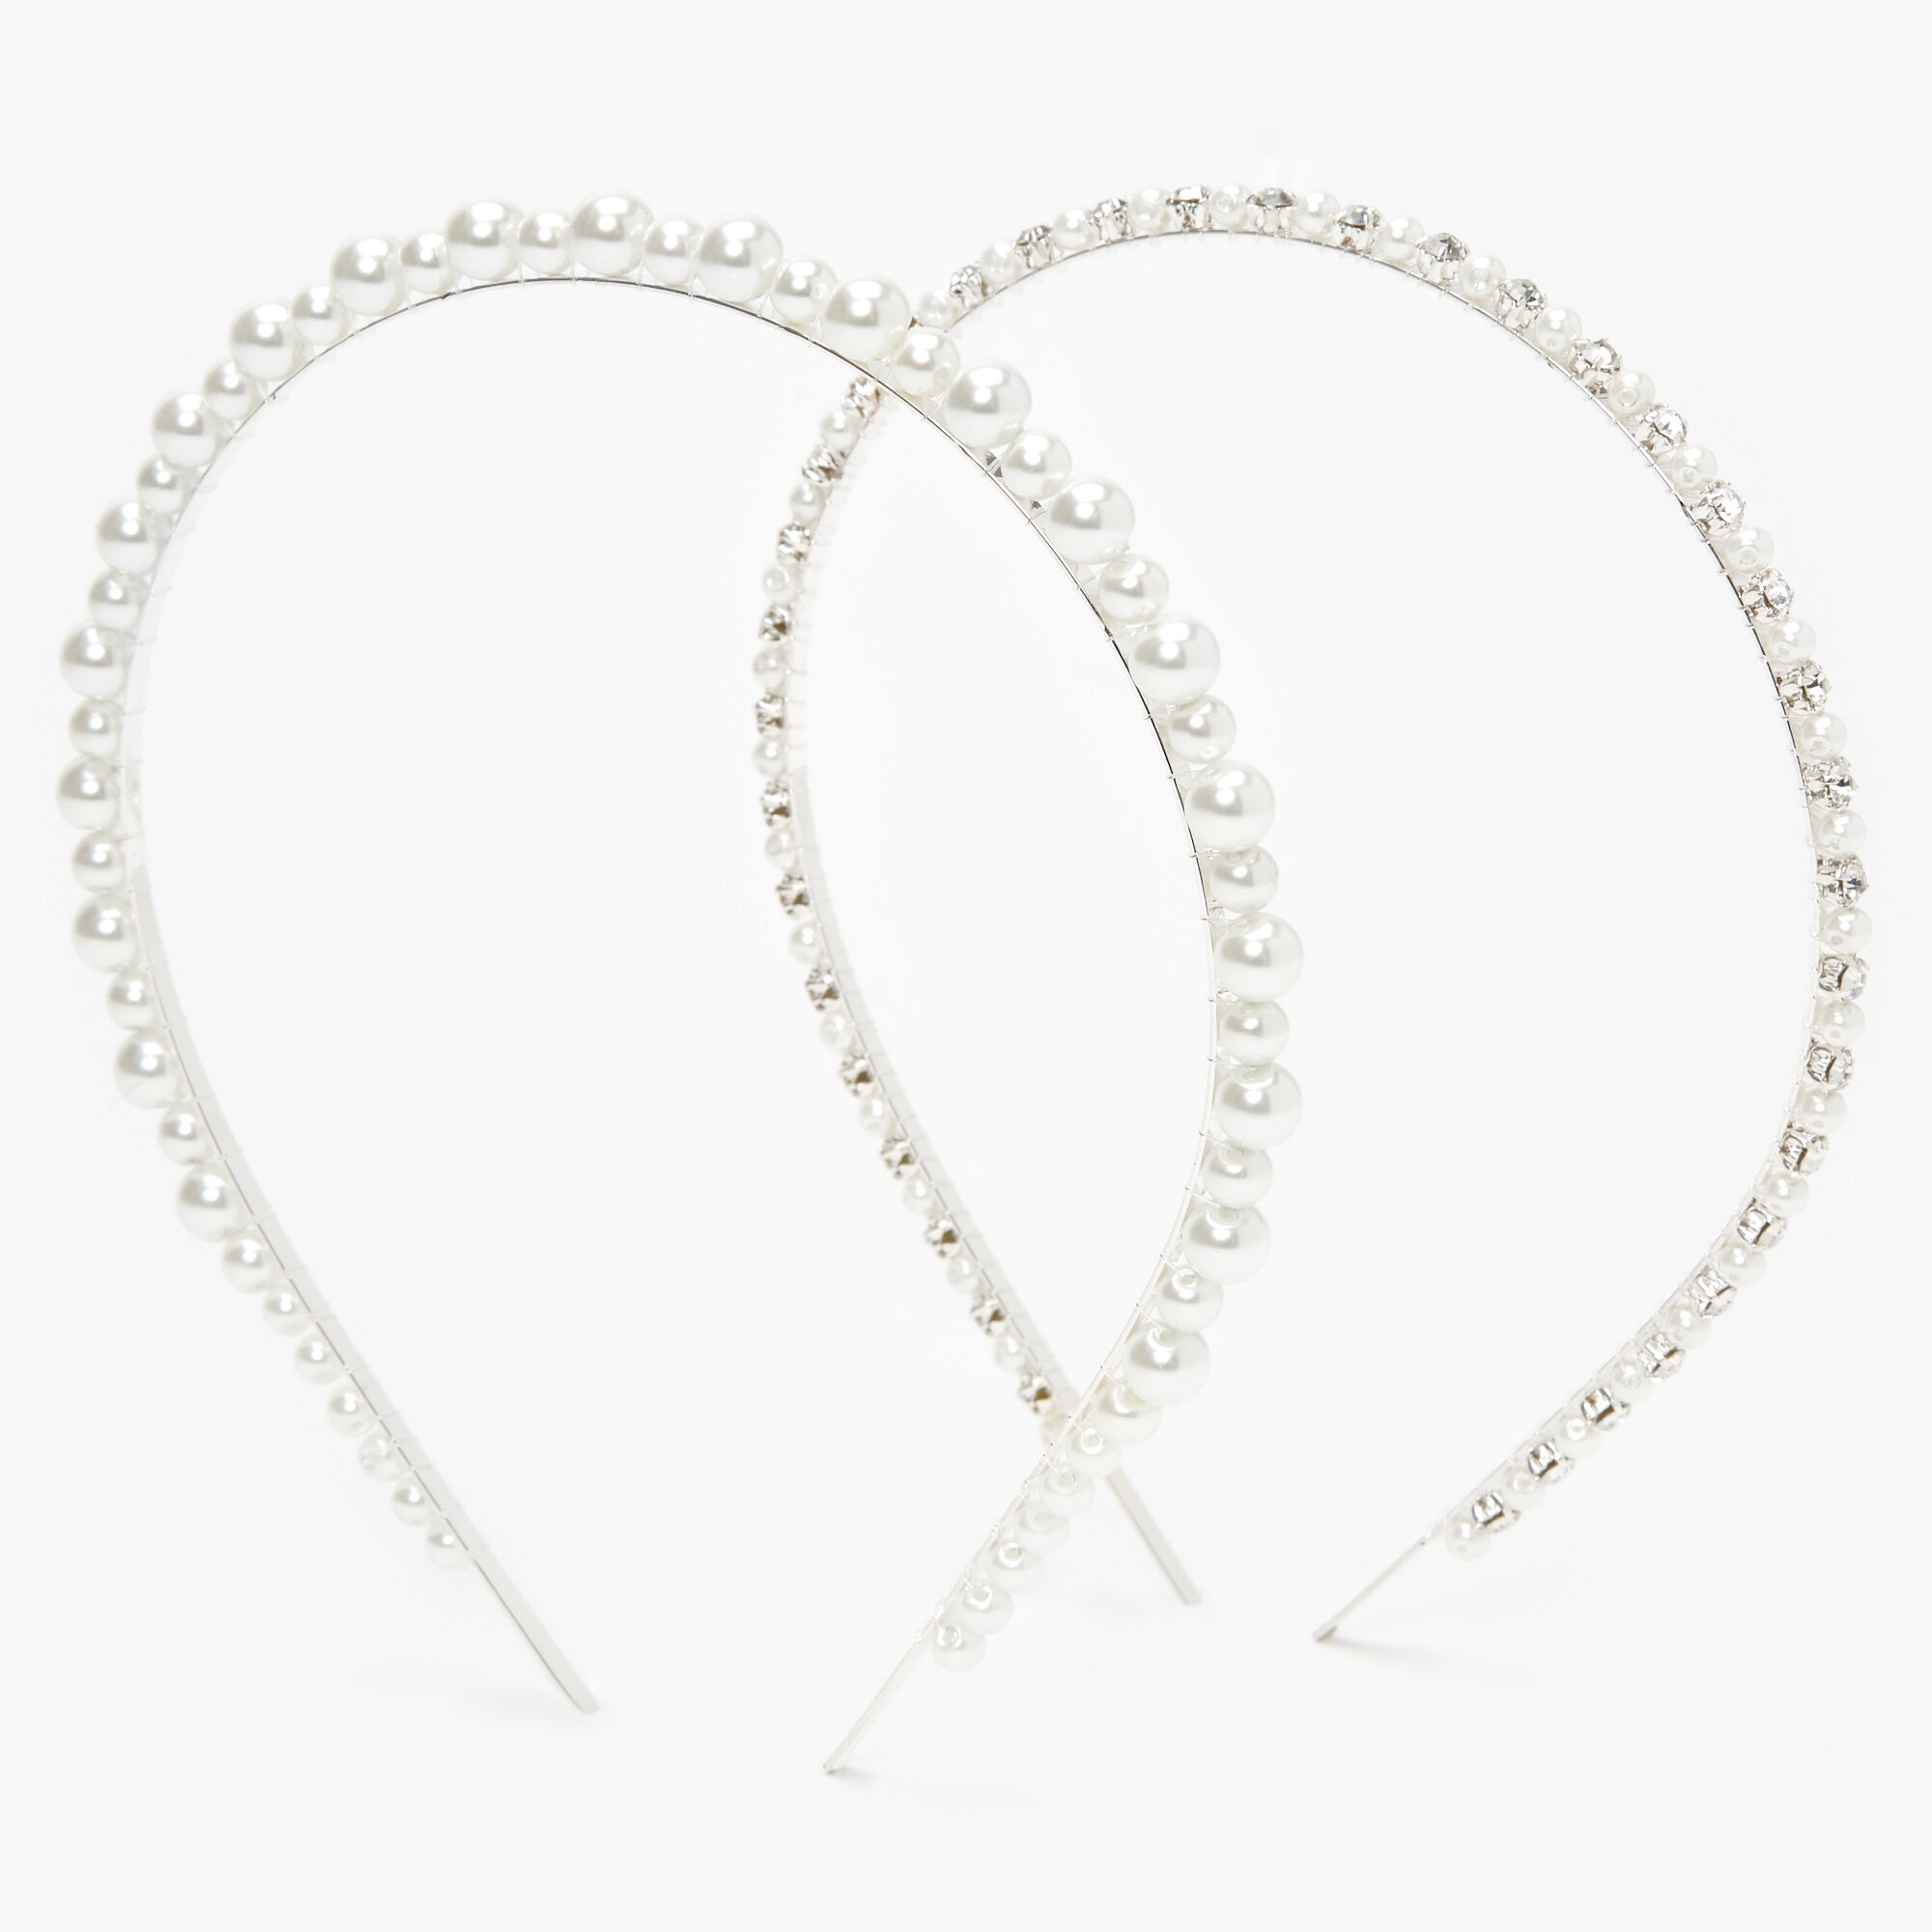 View Claires Chunky Pearl Faux Rhinestone Headbands 2 Pack Ivory information